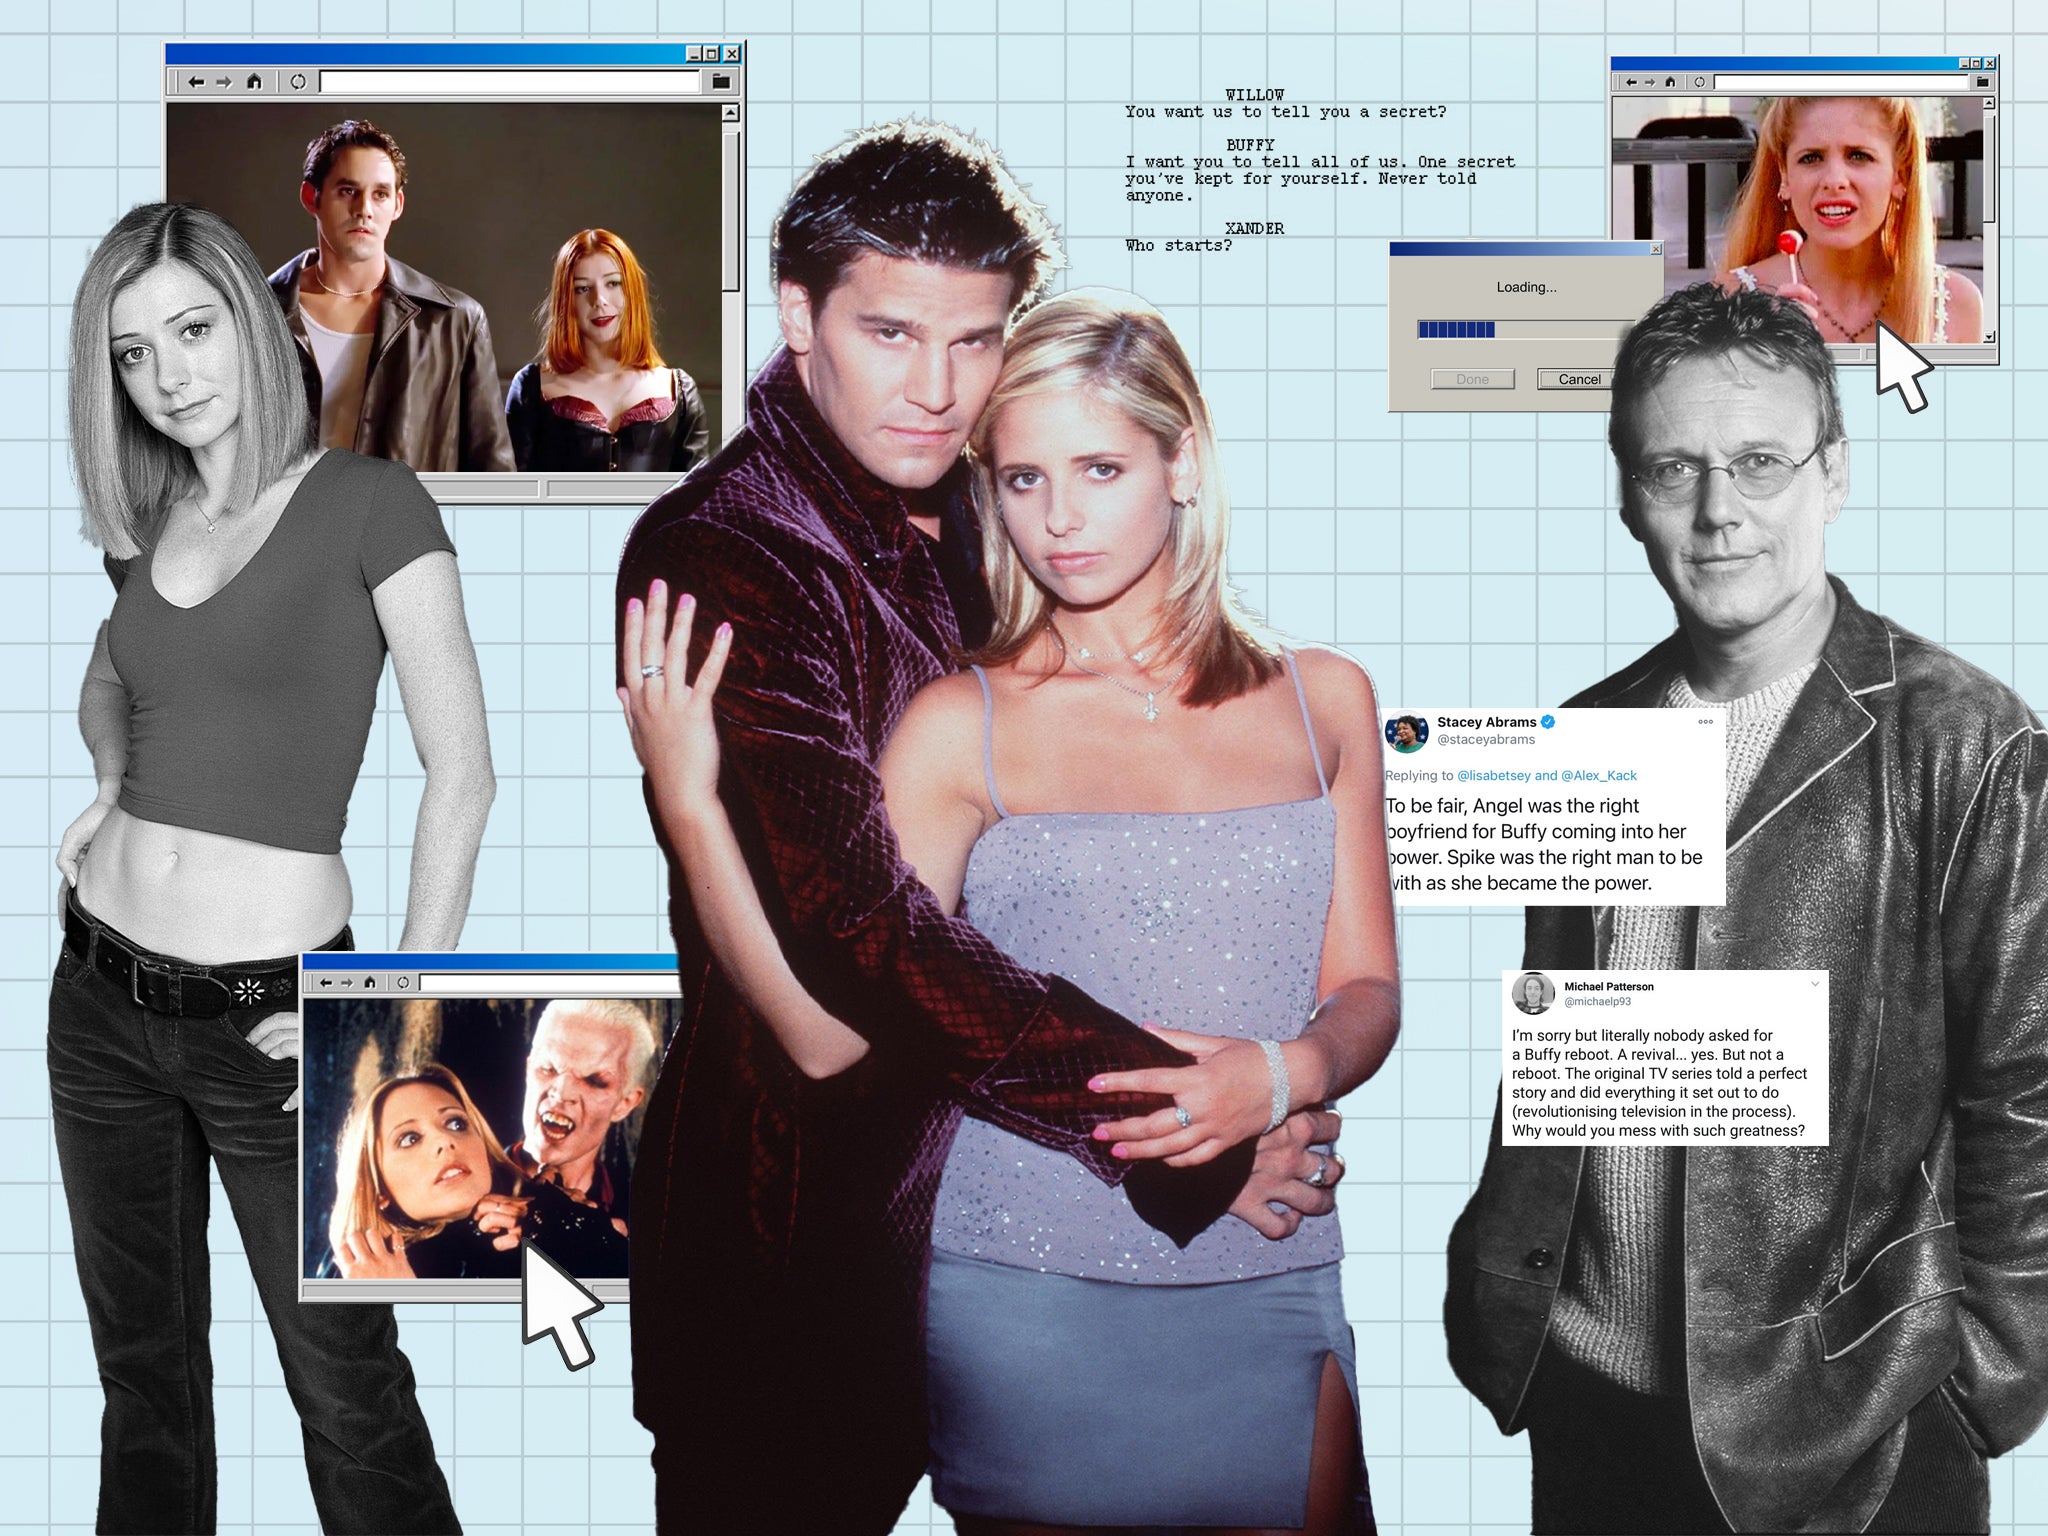 How have the accusations against the creator of ‘Buffy’ changed how it is perceived?